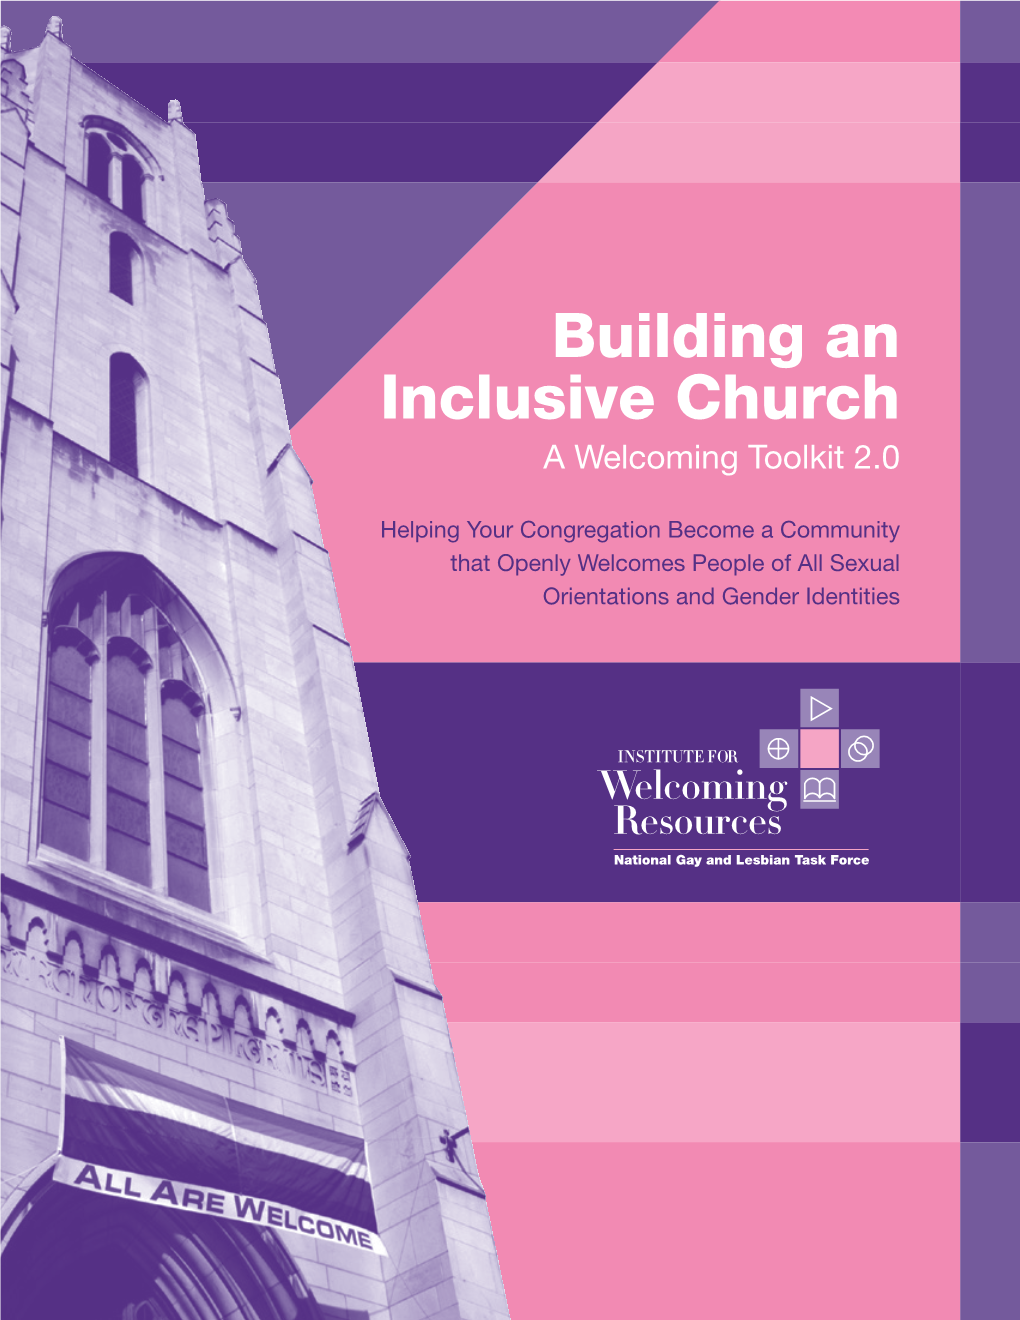 Building an Inclusive Church: a Welcoming Toolkit